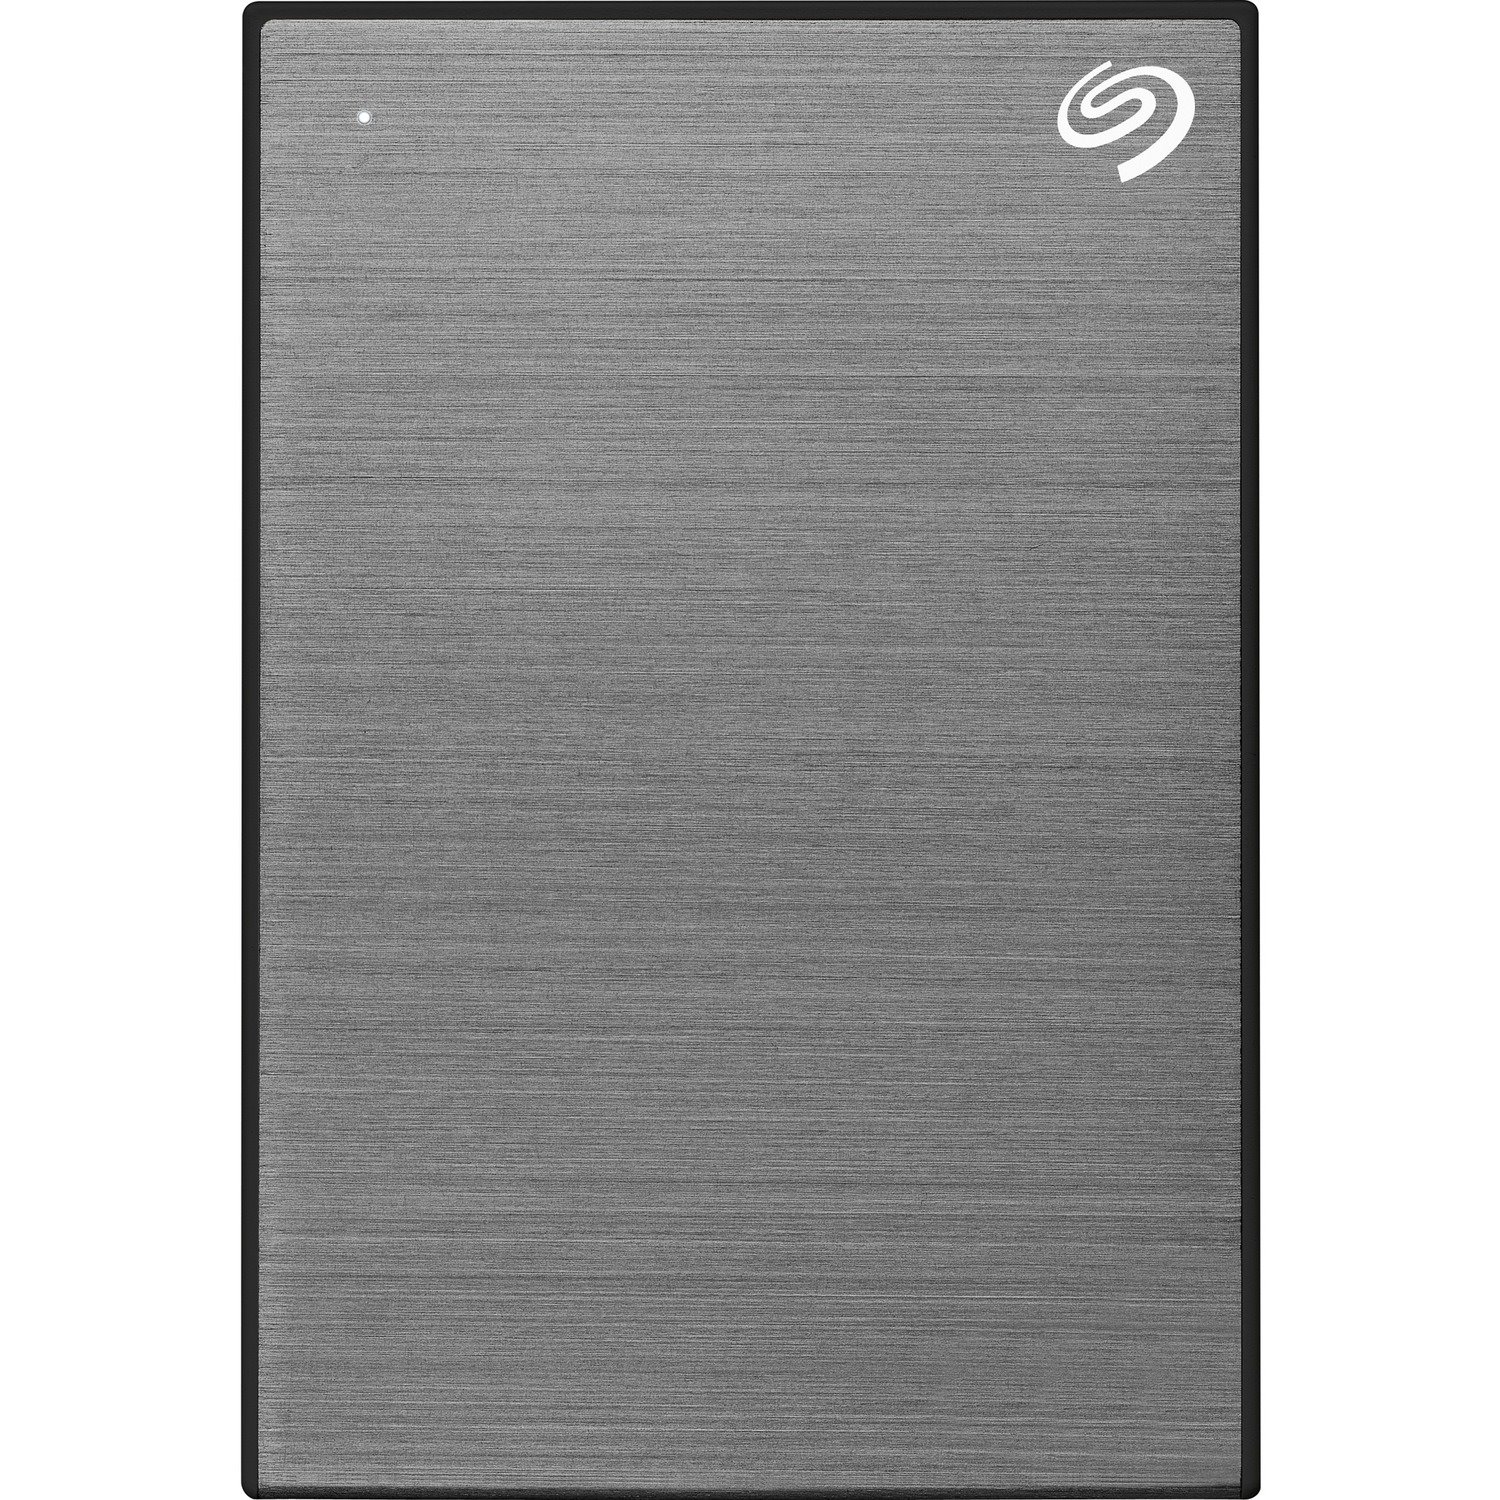 Seagate One Touch STKY2000404 2 TB Portable Hard Drive - External - Space Gray